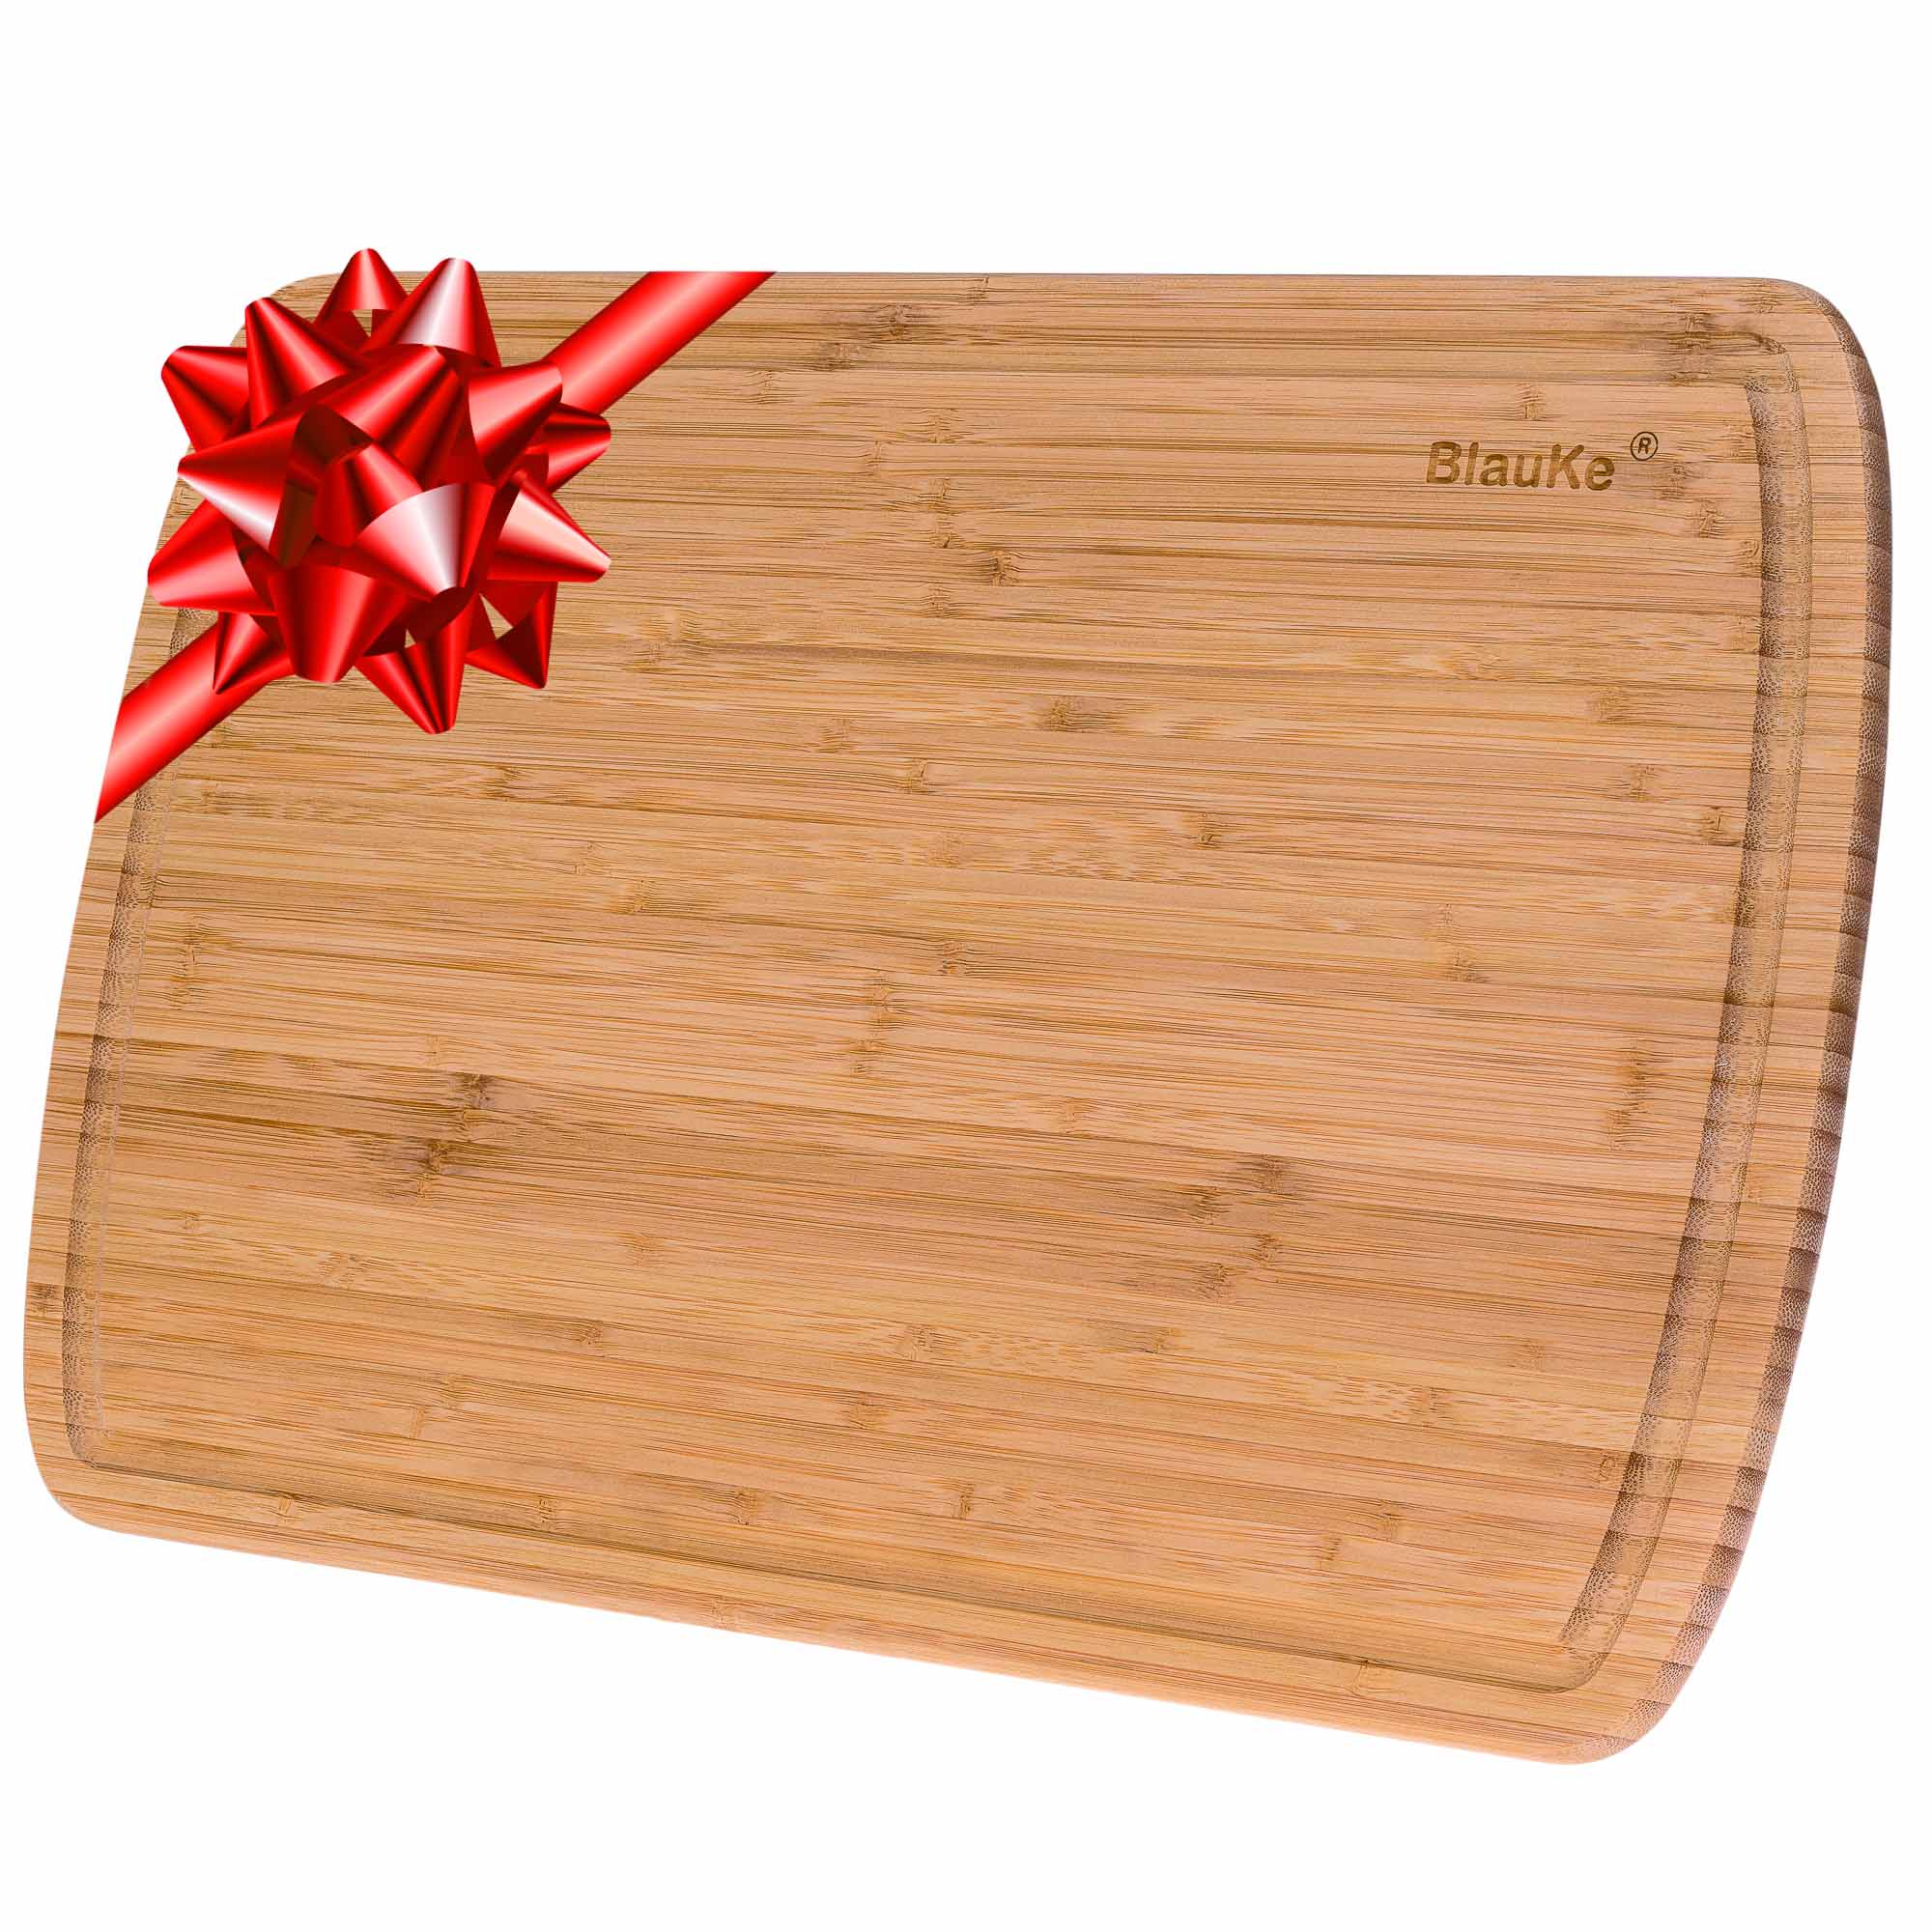 Extra Large Bamboo Cutting Board - 17x12.5 inch Wood Cutting Board for Meat,  Cheese, Veggies - Wood Serving Tray with Juice Groove and 3 Compartments